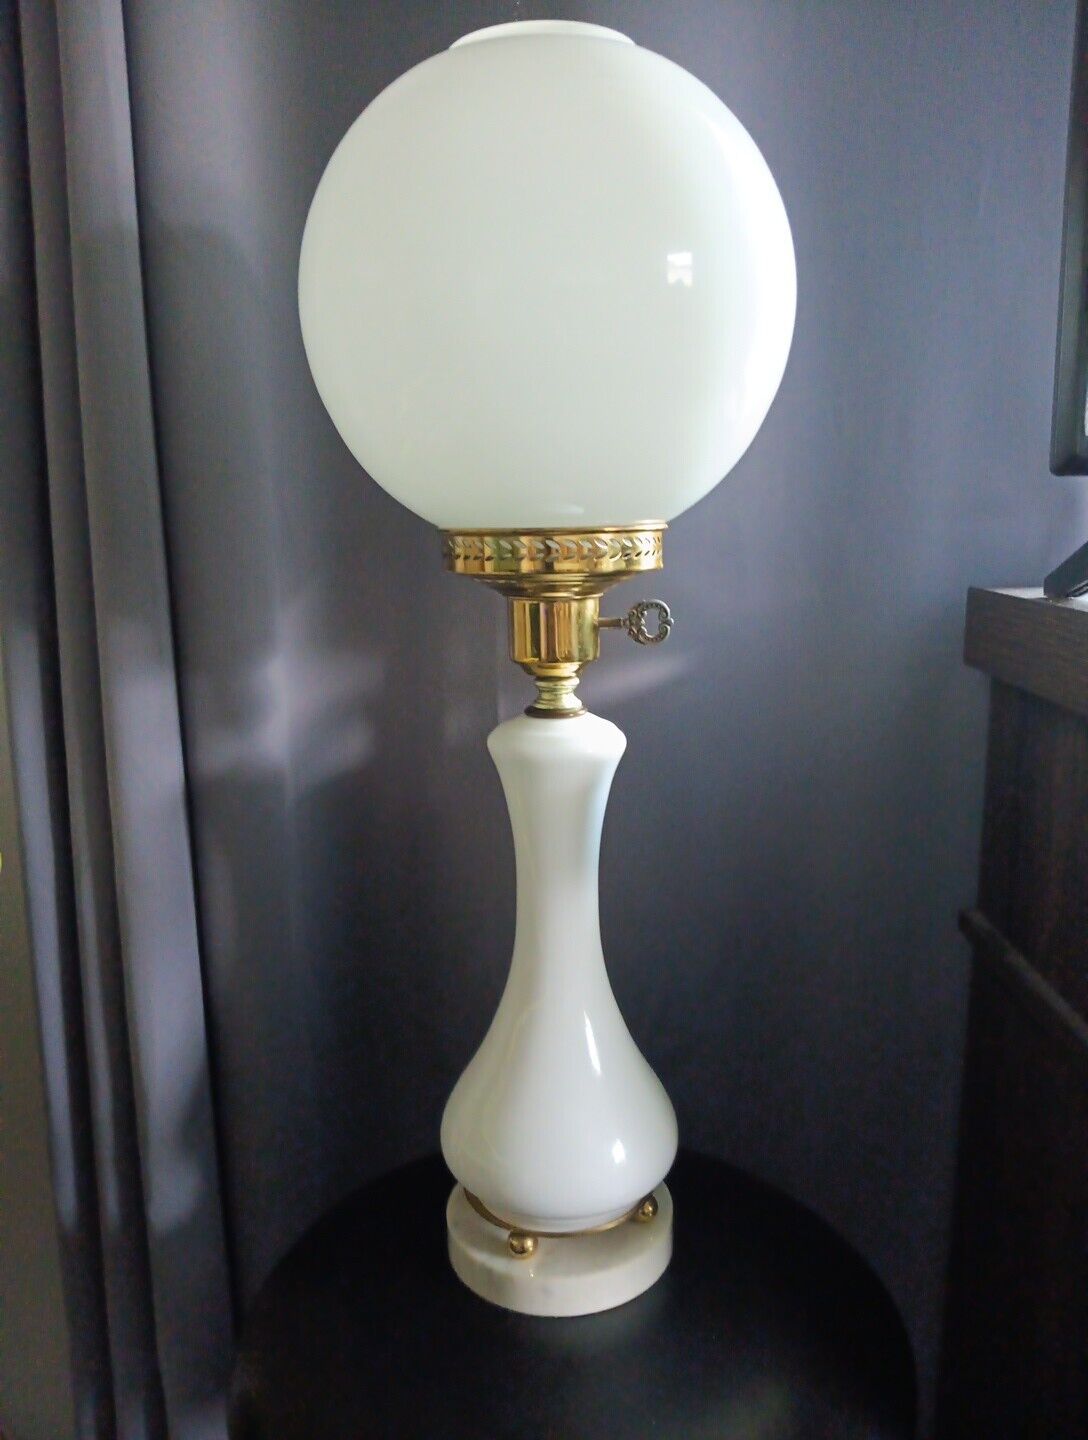 Vintage White Glass Banquet Lamp with Marble Base